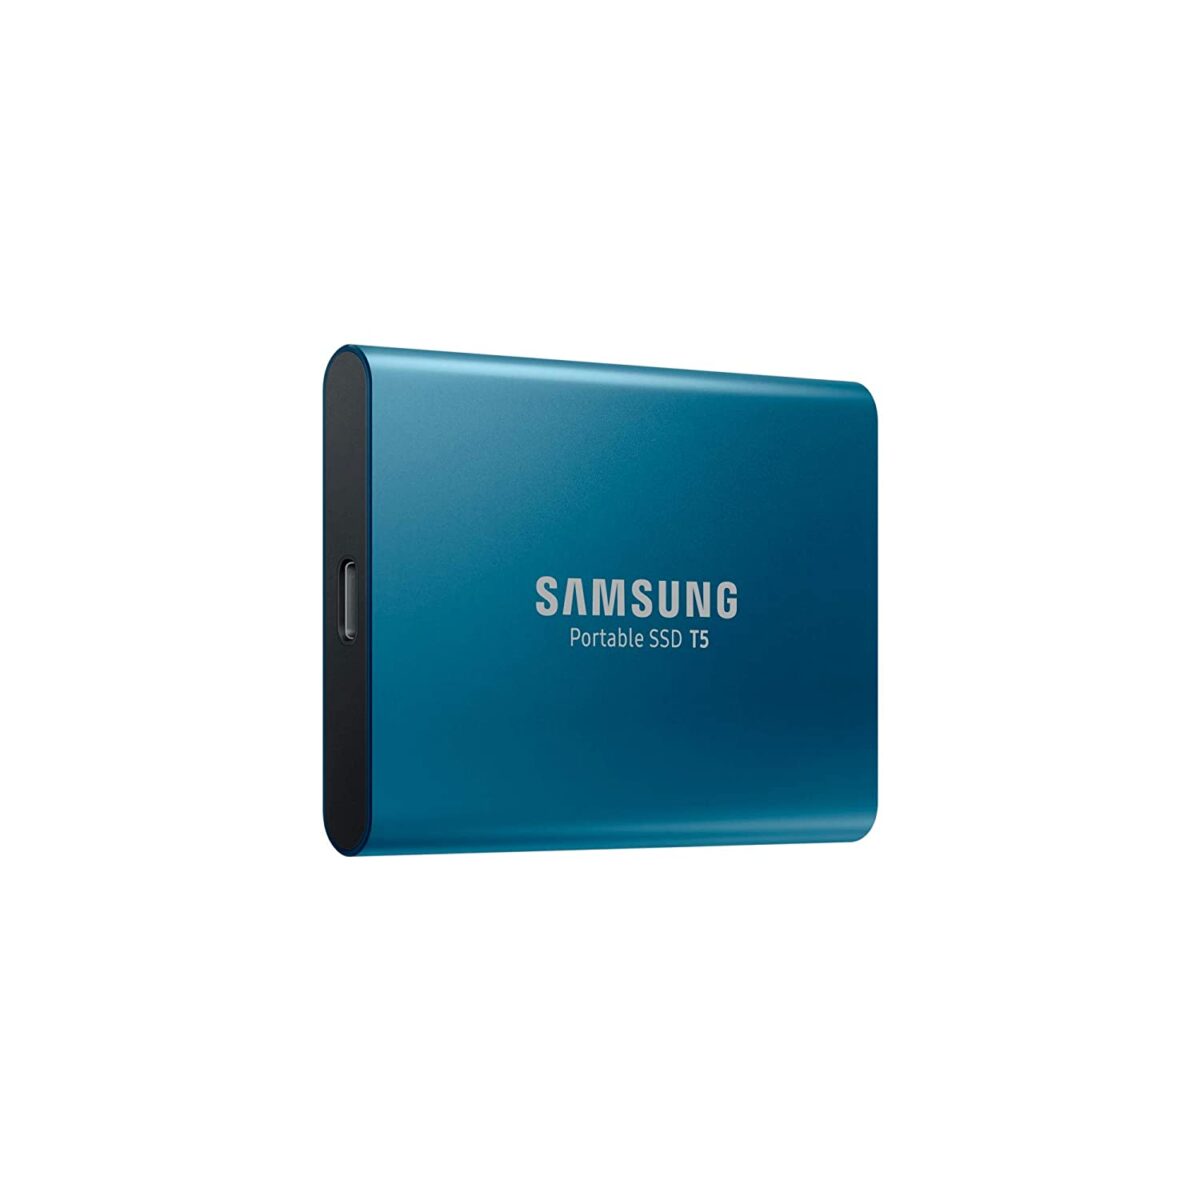 Samsung T5 500GB External Solid State Drive (Alluring Blue)